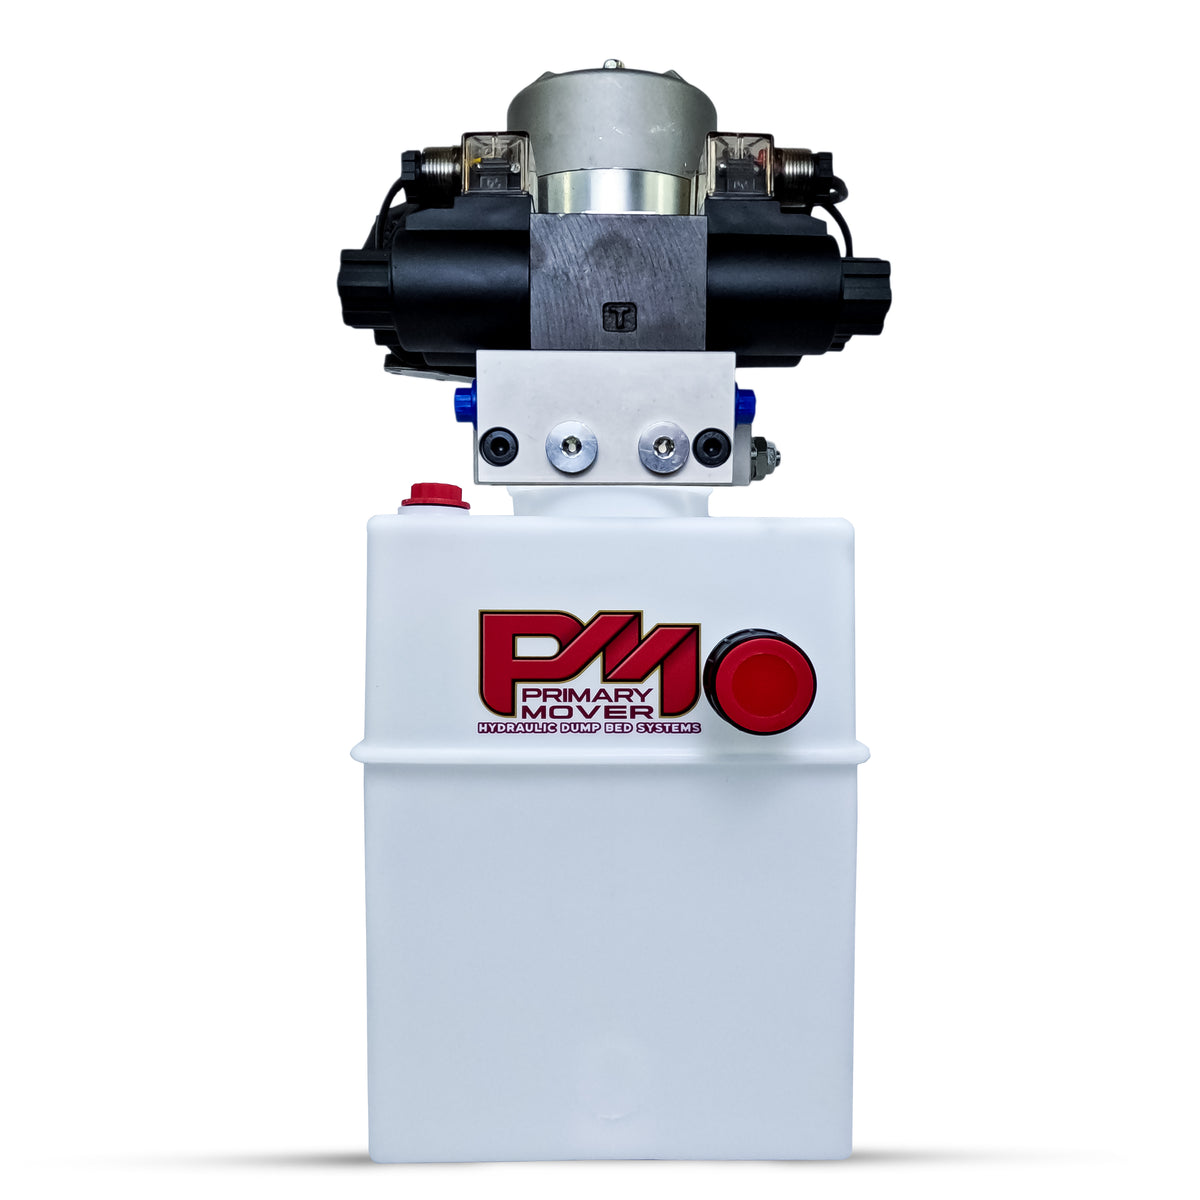 Primary Mover 12V Dual Double-Acting Hydraulic Power Unit | Poly, featuring a white box with red buttons and a black and silver valve.